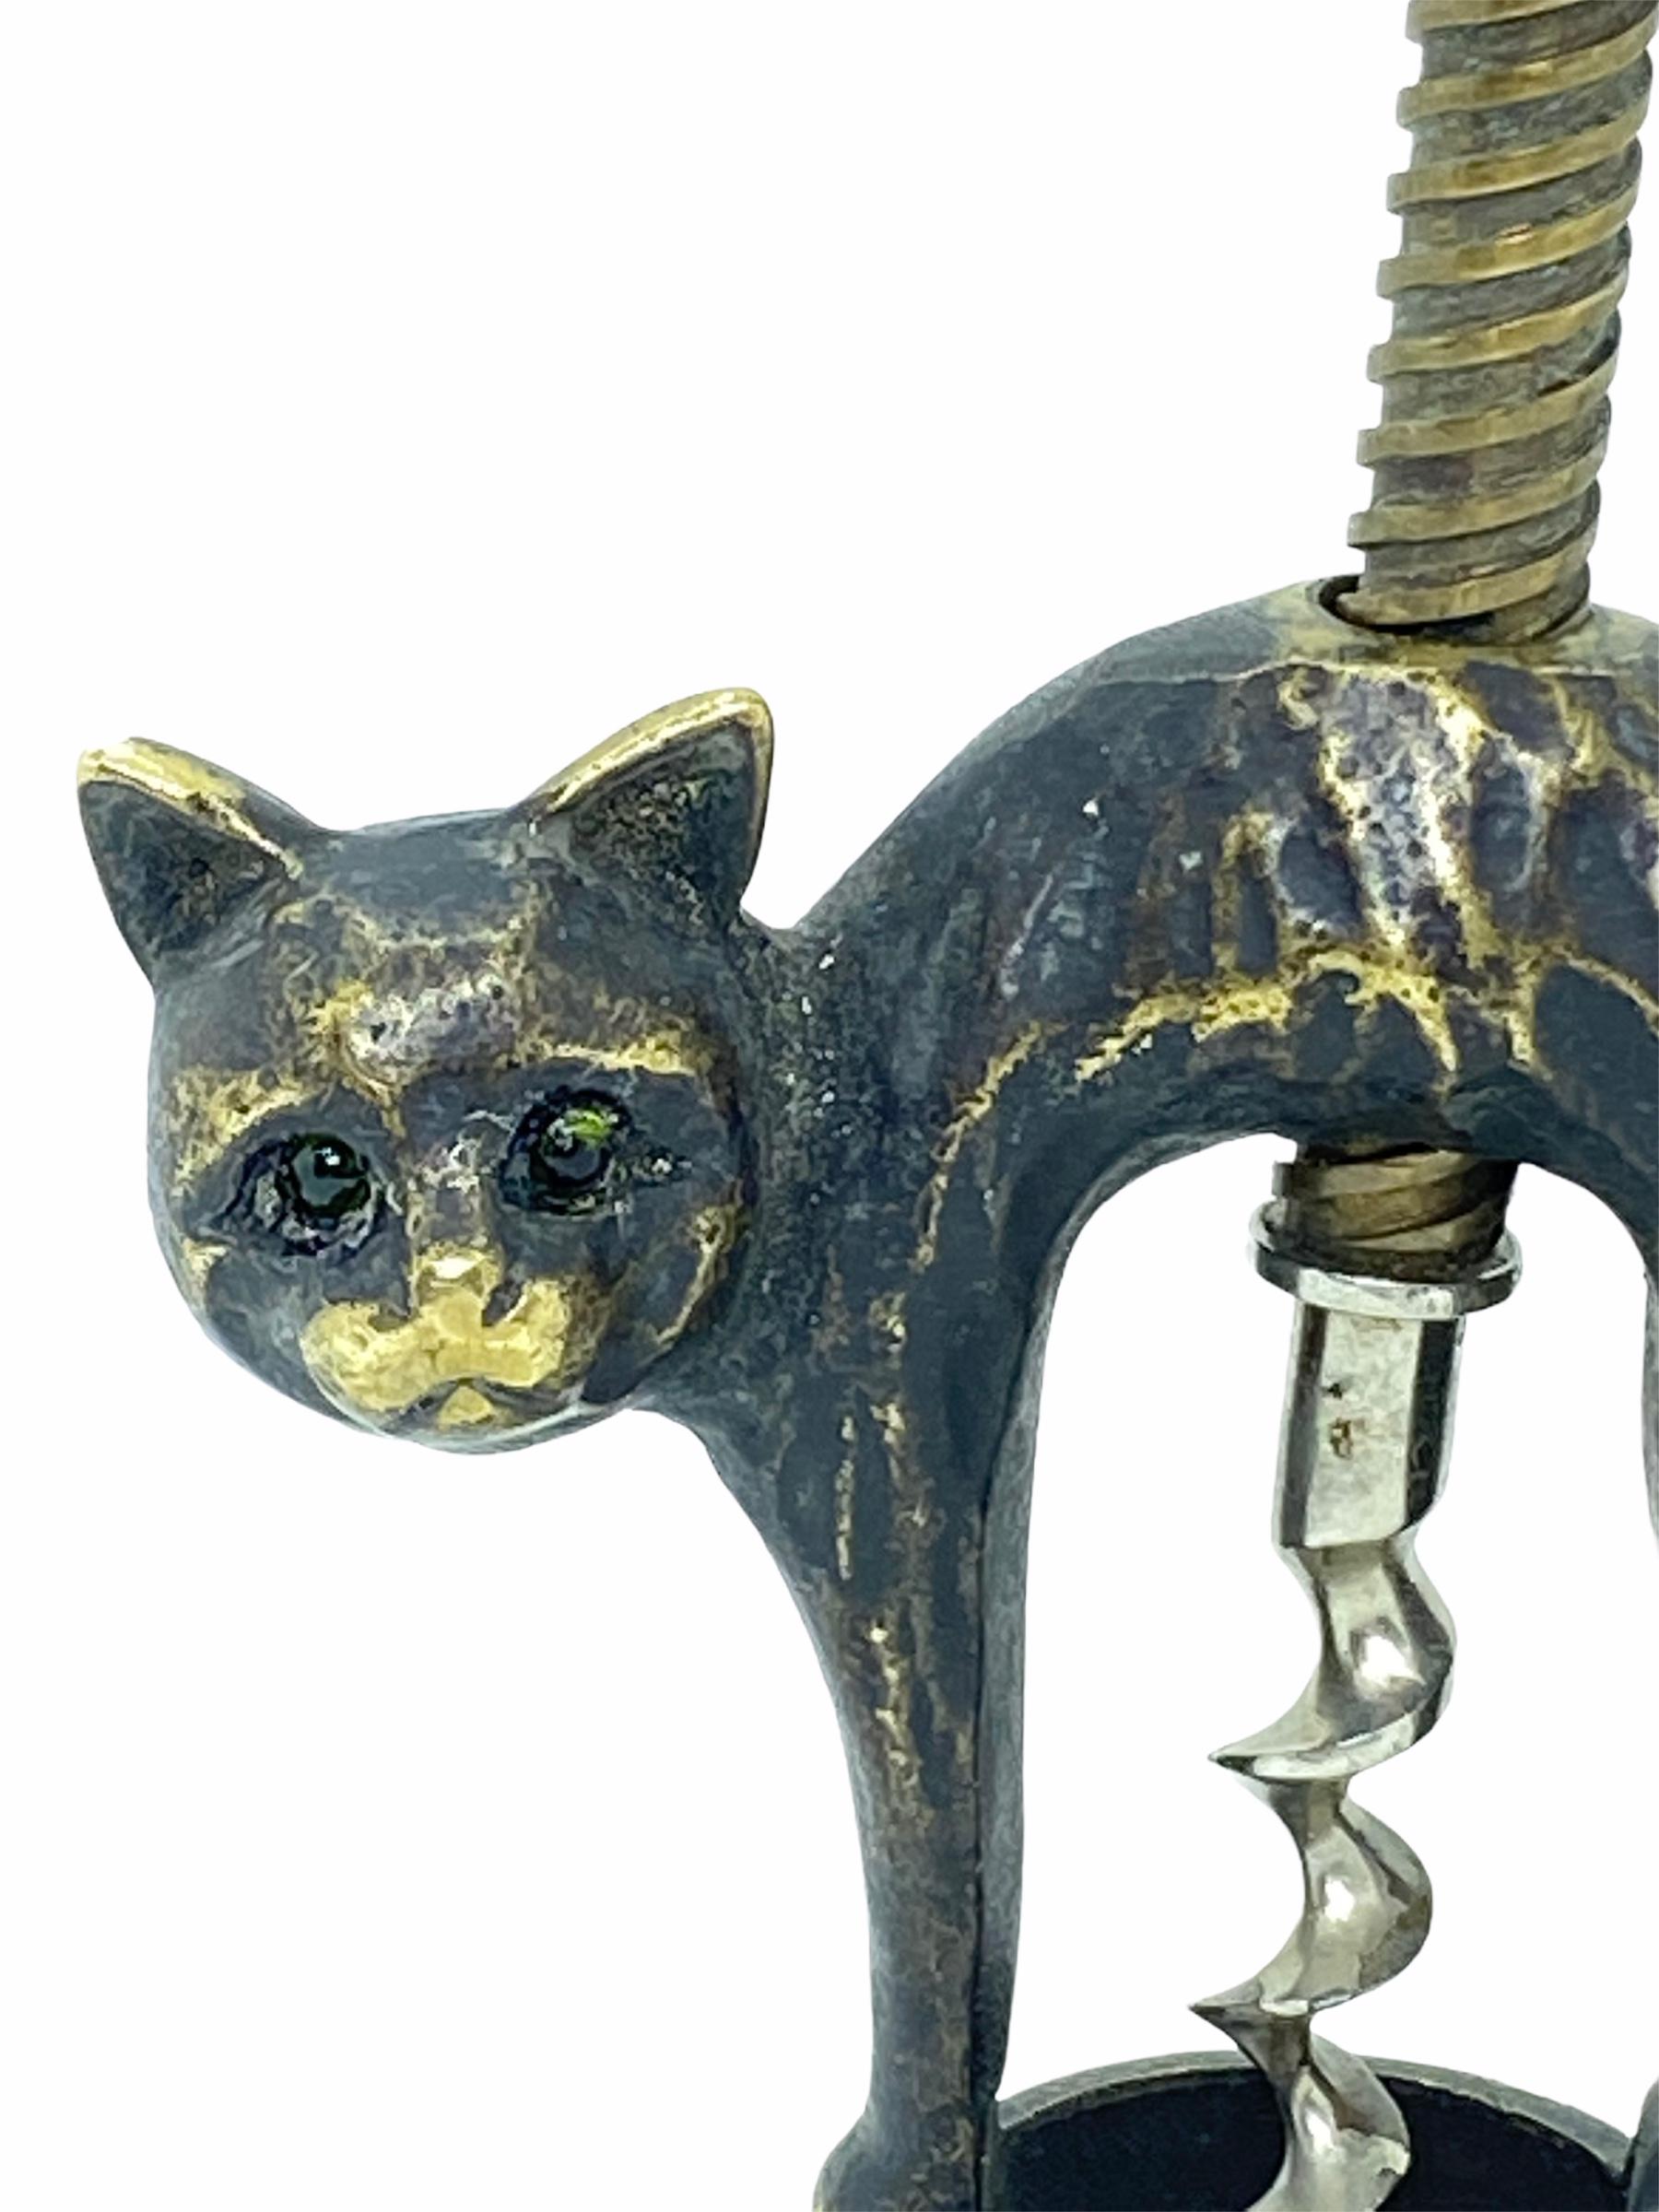 Classic early 1950s Austrian Baller corkscrew in the form of a Halloween cat. Nice addition to your room or just for your collection of Austrian bronze items. Found at an estate sale in Vienna, Austria. The cat has glass eyes.